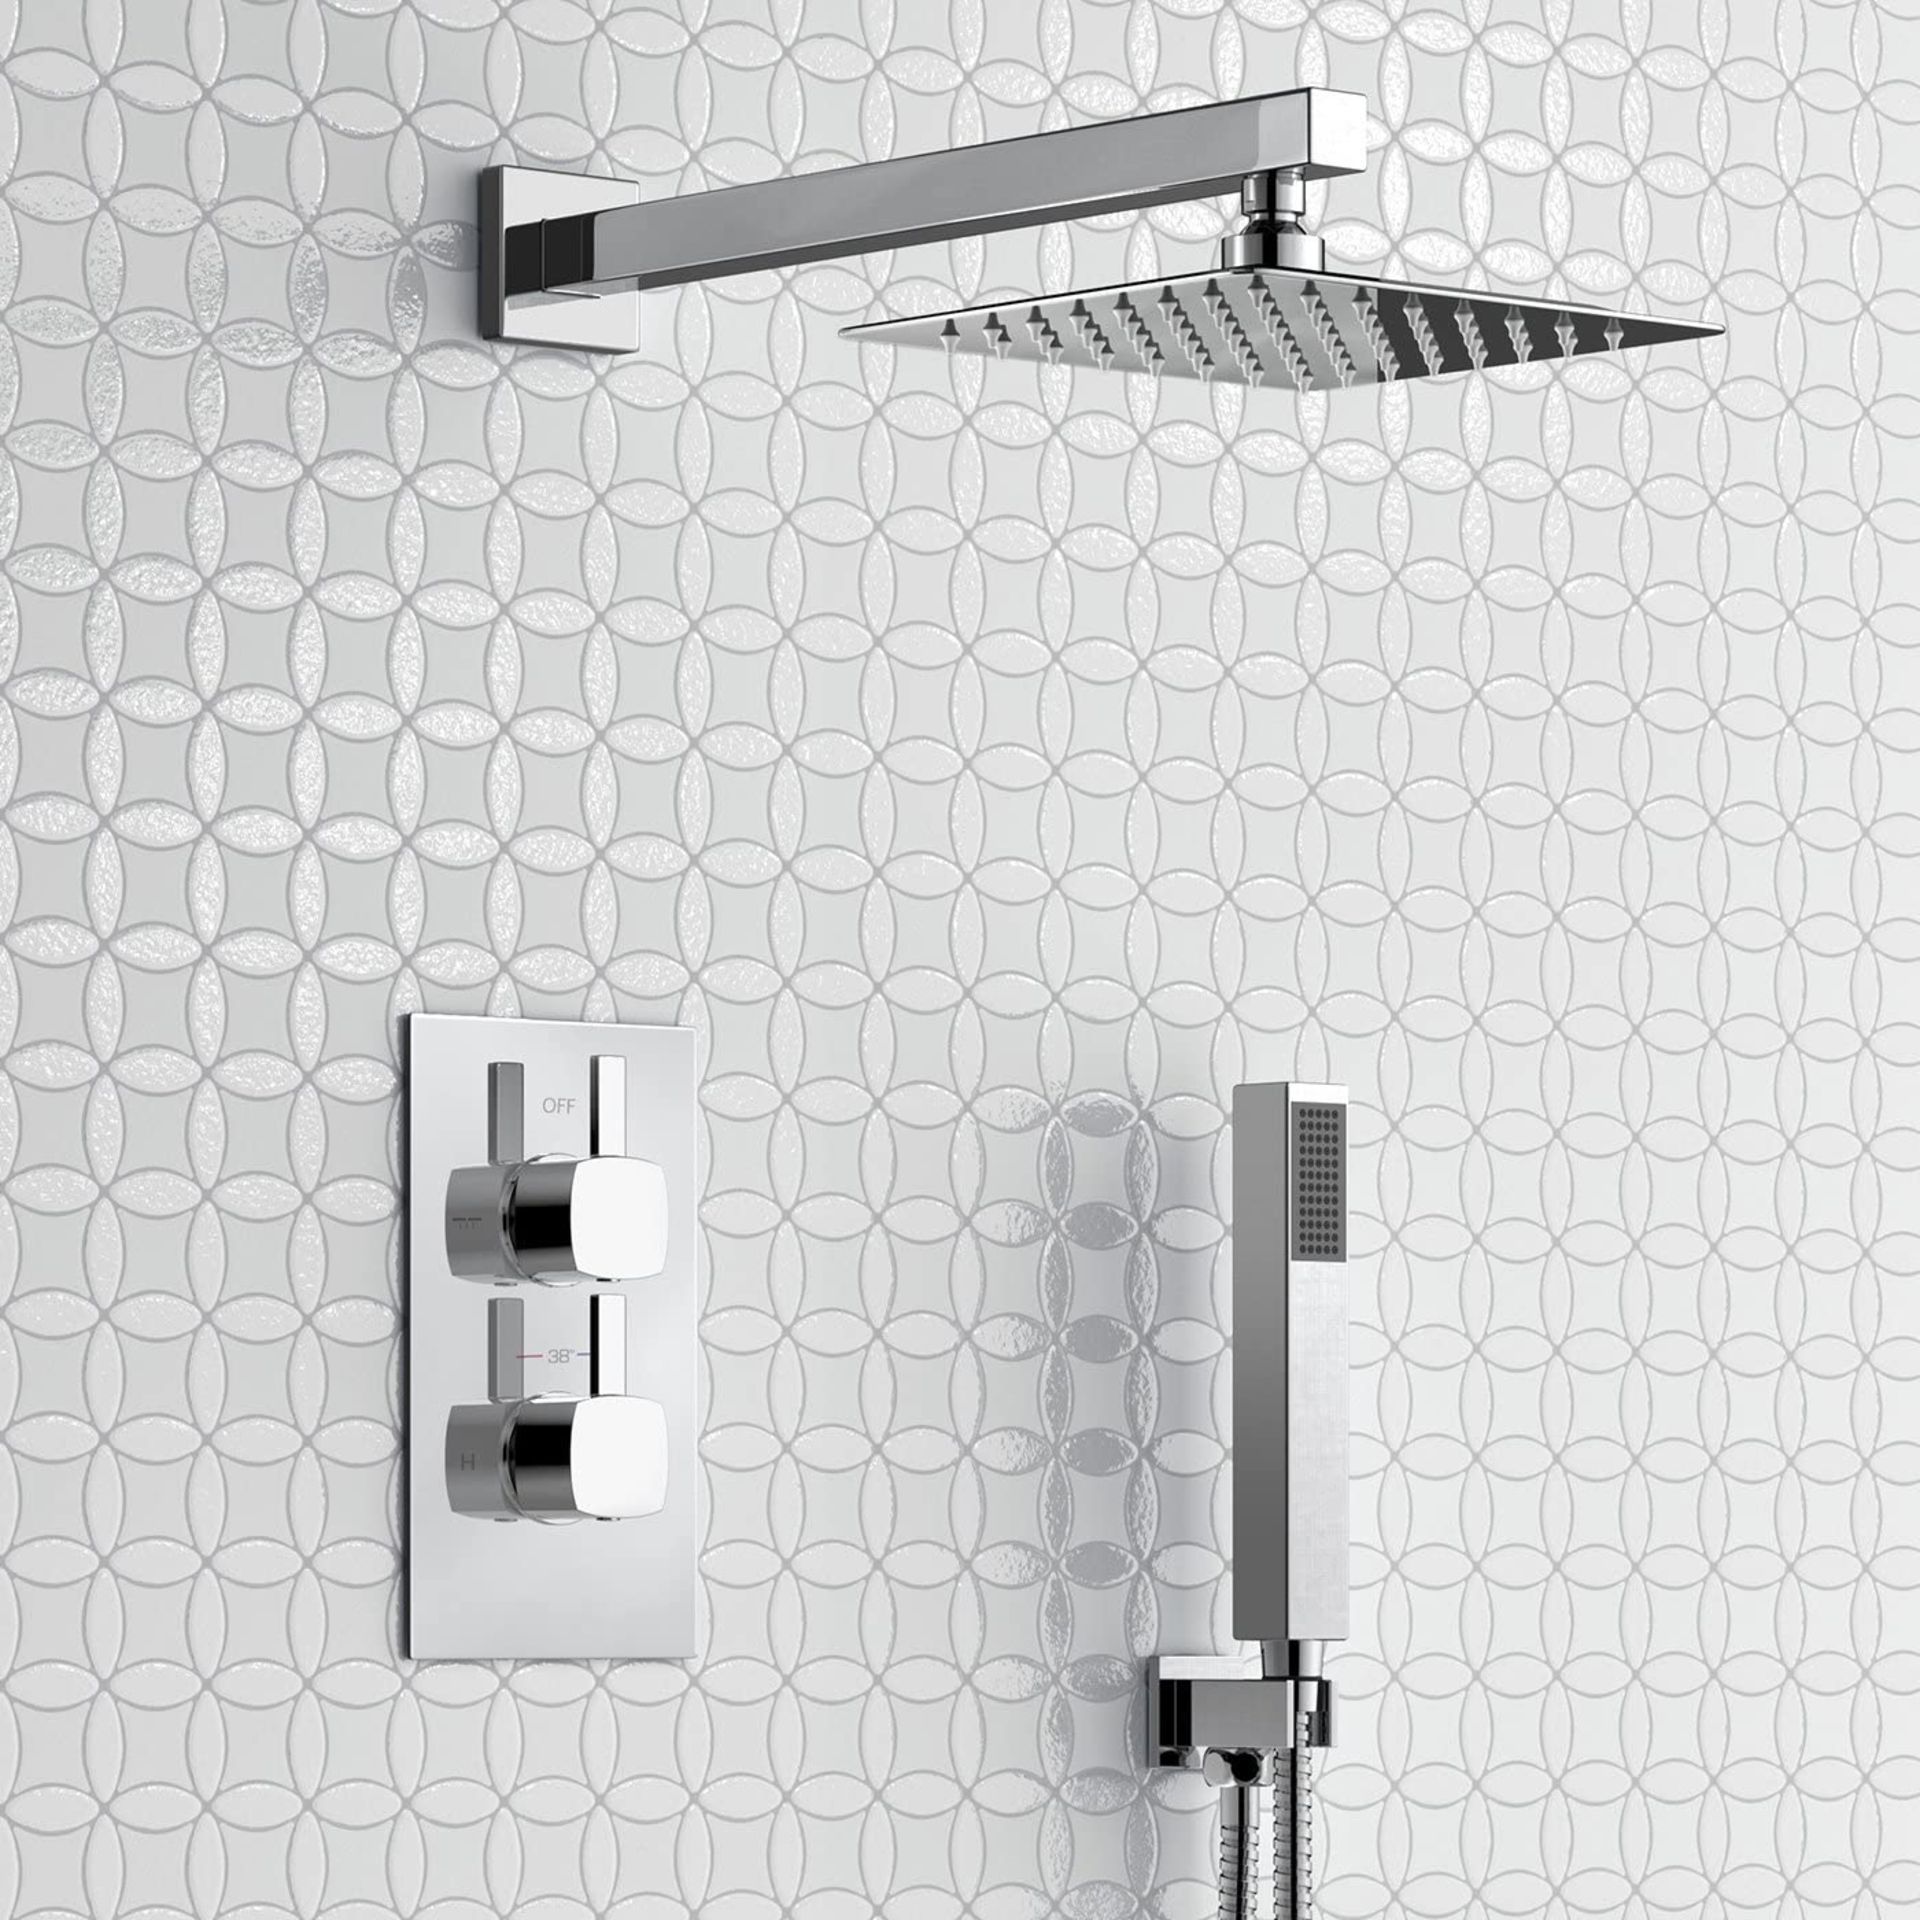 New & Boxed Thermostatic Concealed Mixer Shower Set 8 Inch Head Handset + Chrome 2 Way Valve Ki... - Image 2 of 2